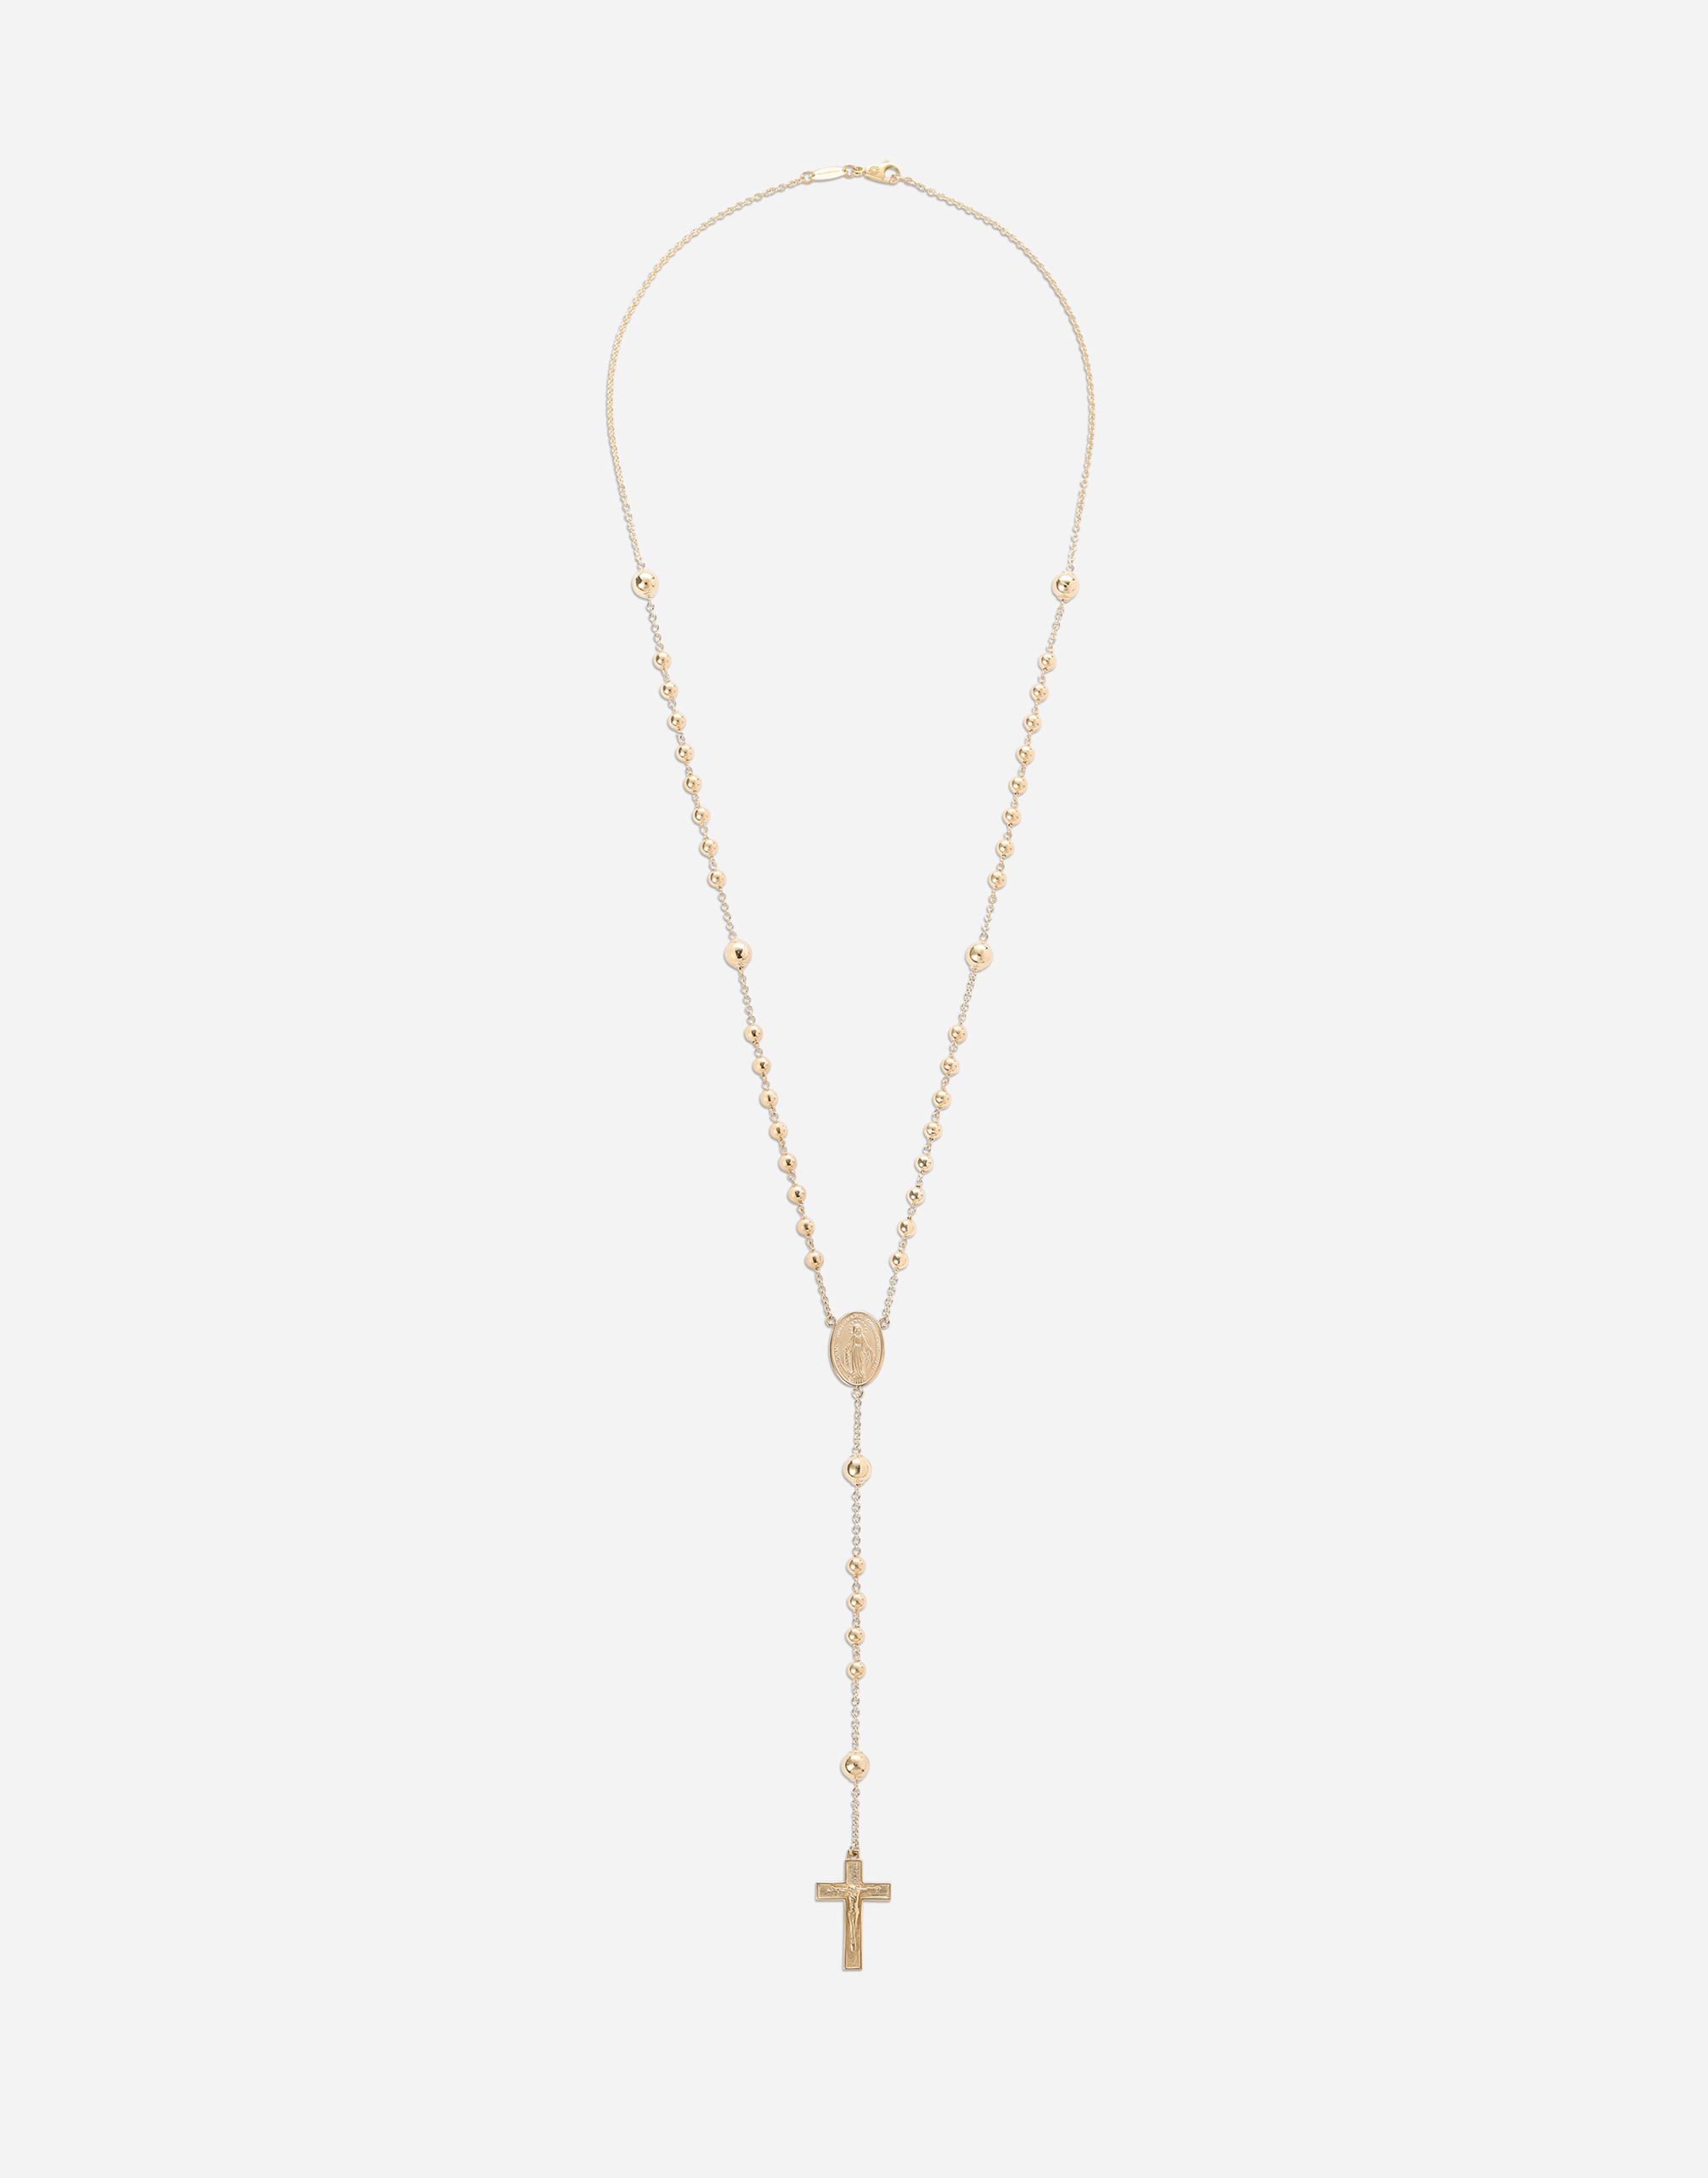 Dolce & Gabbana Tradition Yellow Gold Rosary Necklace